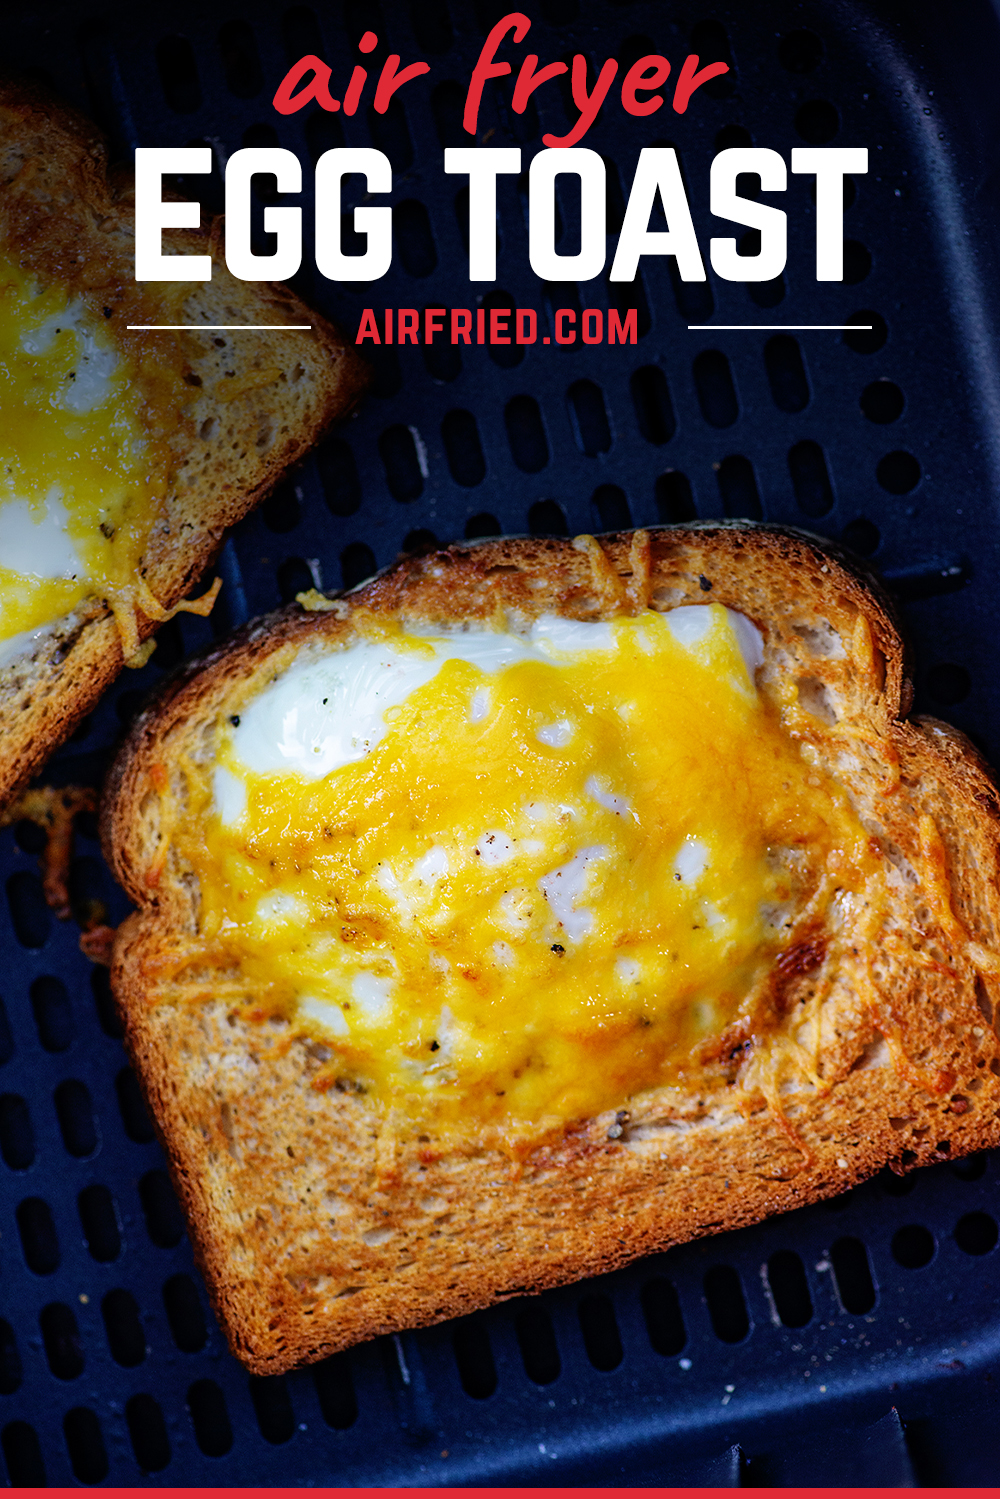 This AIR FRYER EGG TOAST will get breakfast on your table in less than 10 minutes! A delicious runny yolk and a slice of toast to soak it up - makes the perfect quick breakfast!